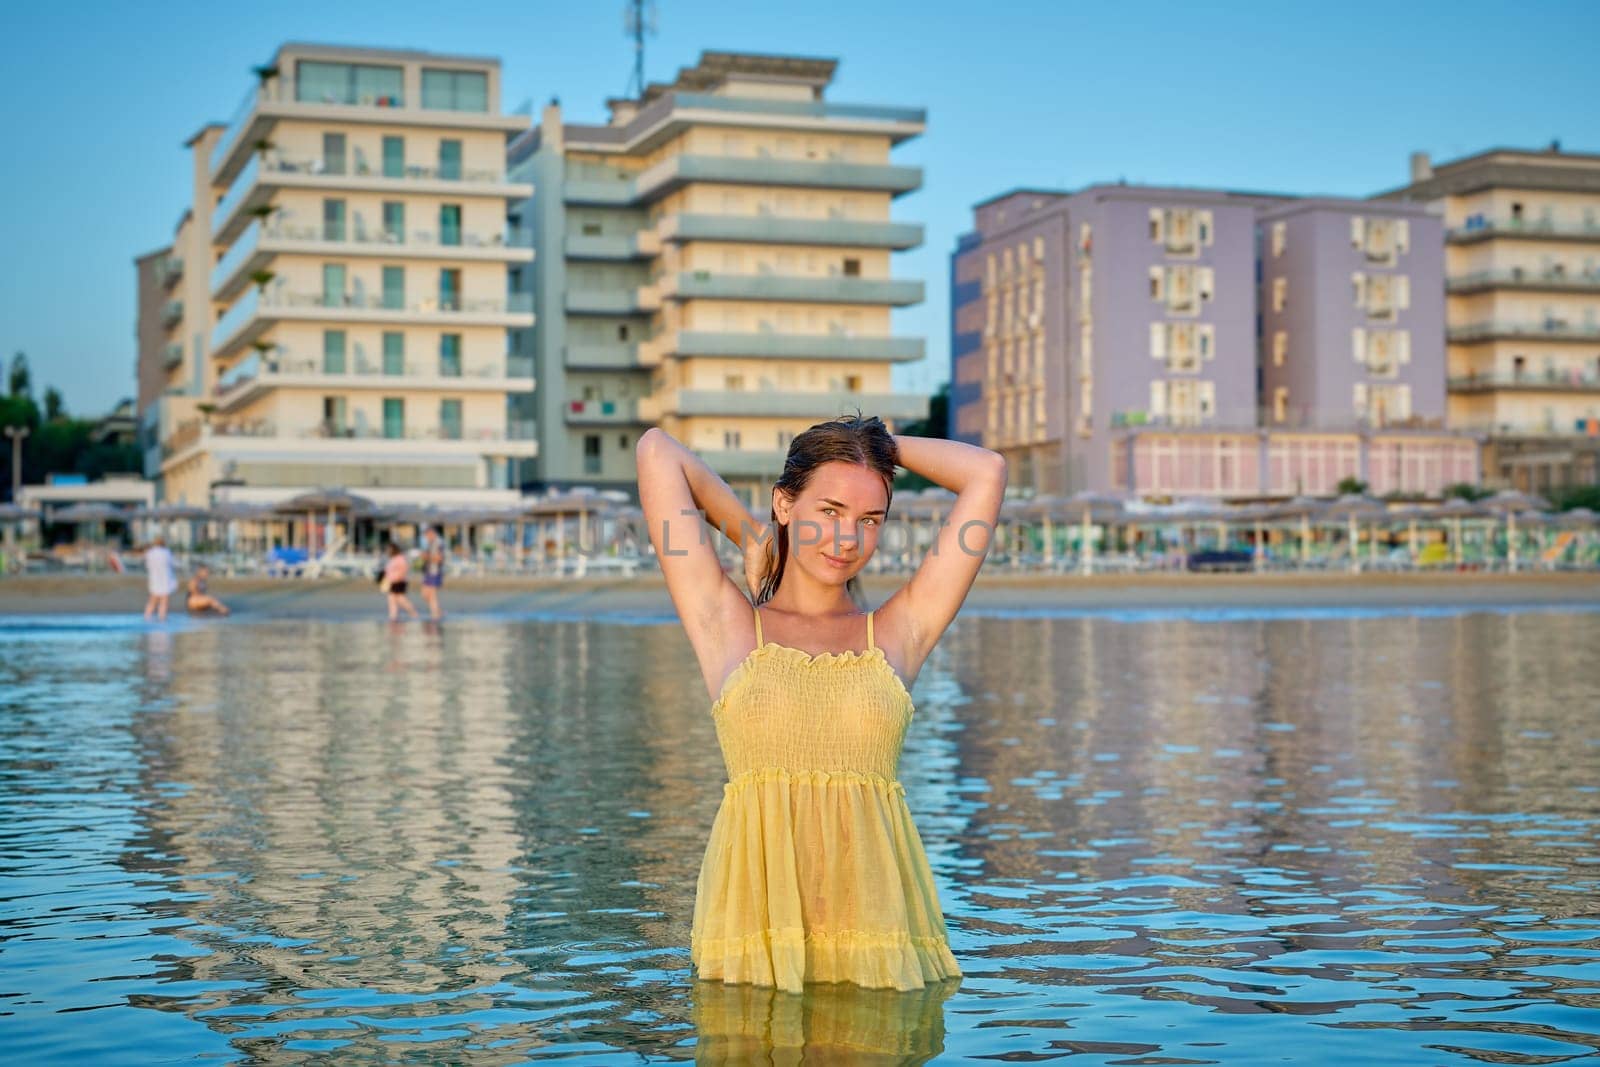 With her hands raised, a young woman early in the morning, against the backdrop of city buildings, goes into the water on the city beach, watching the sunrise